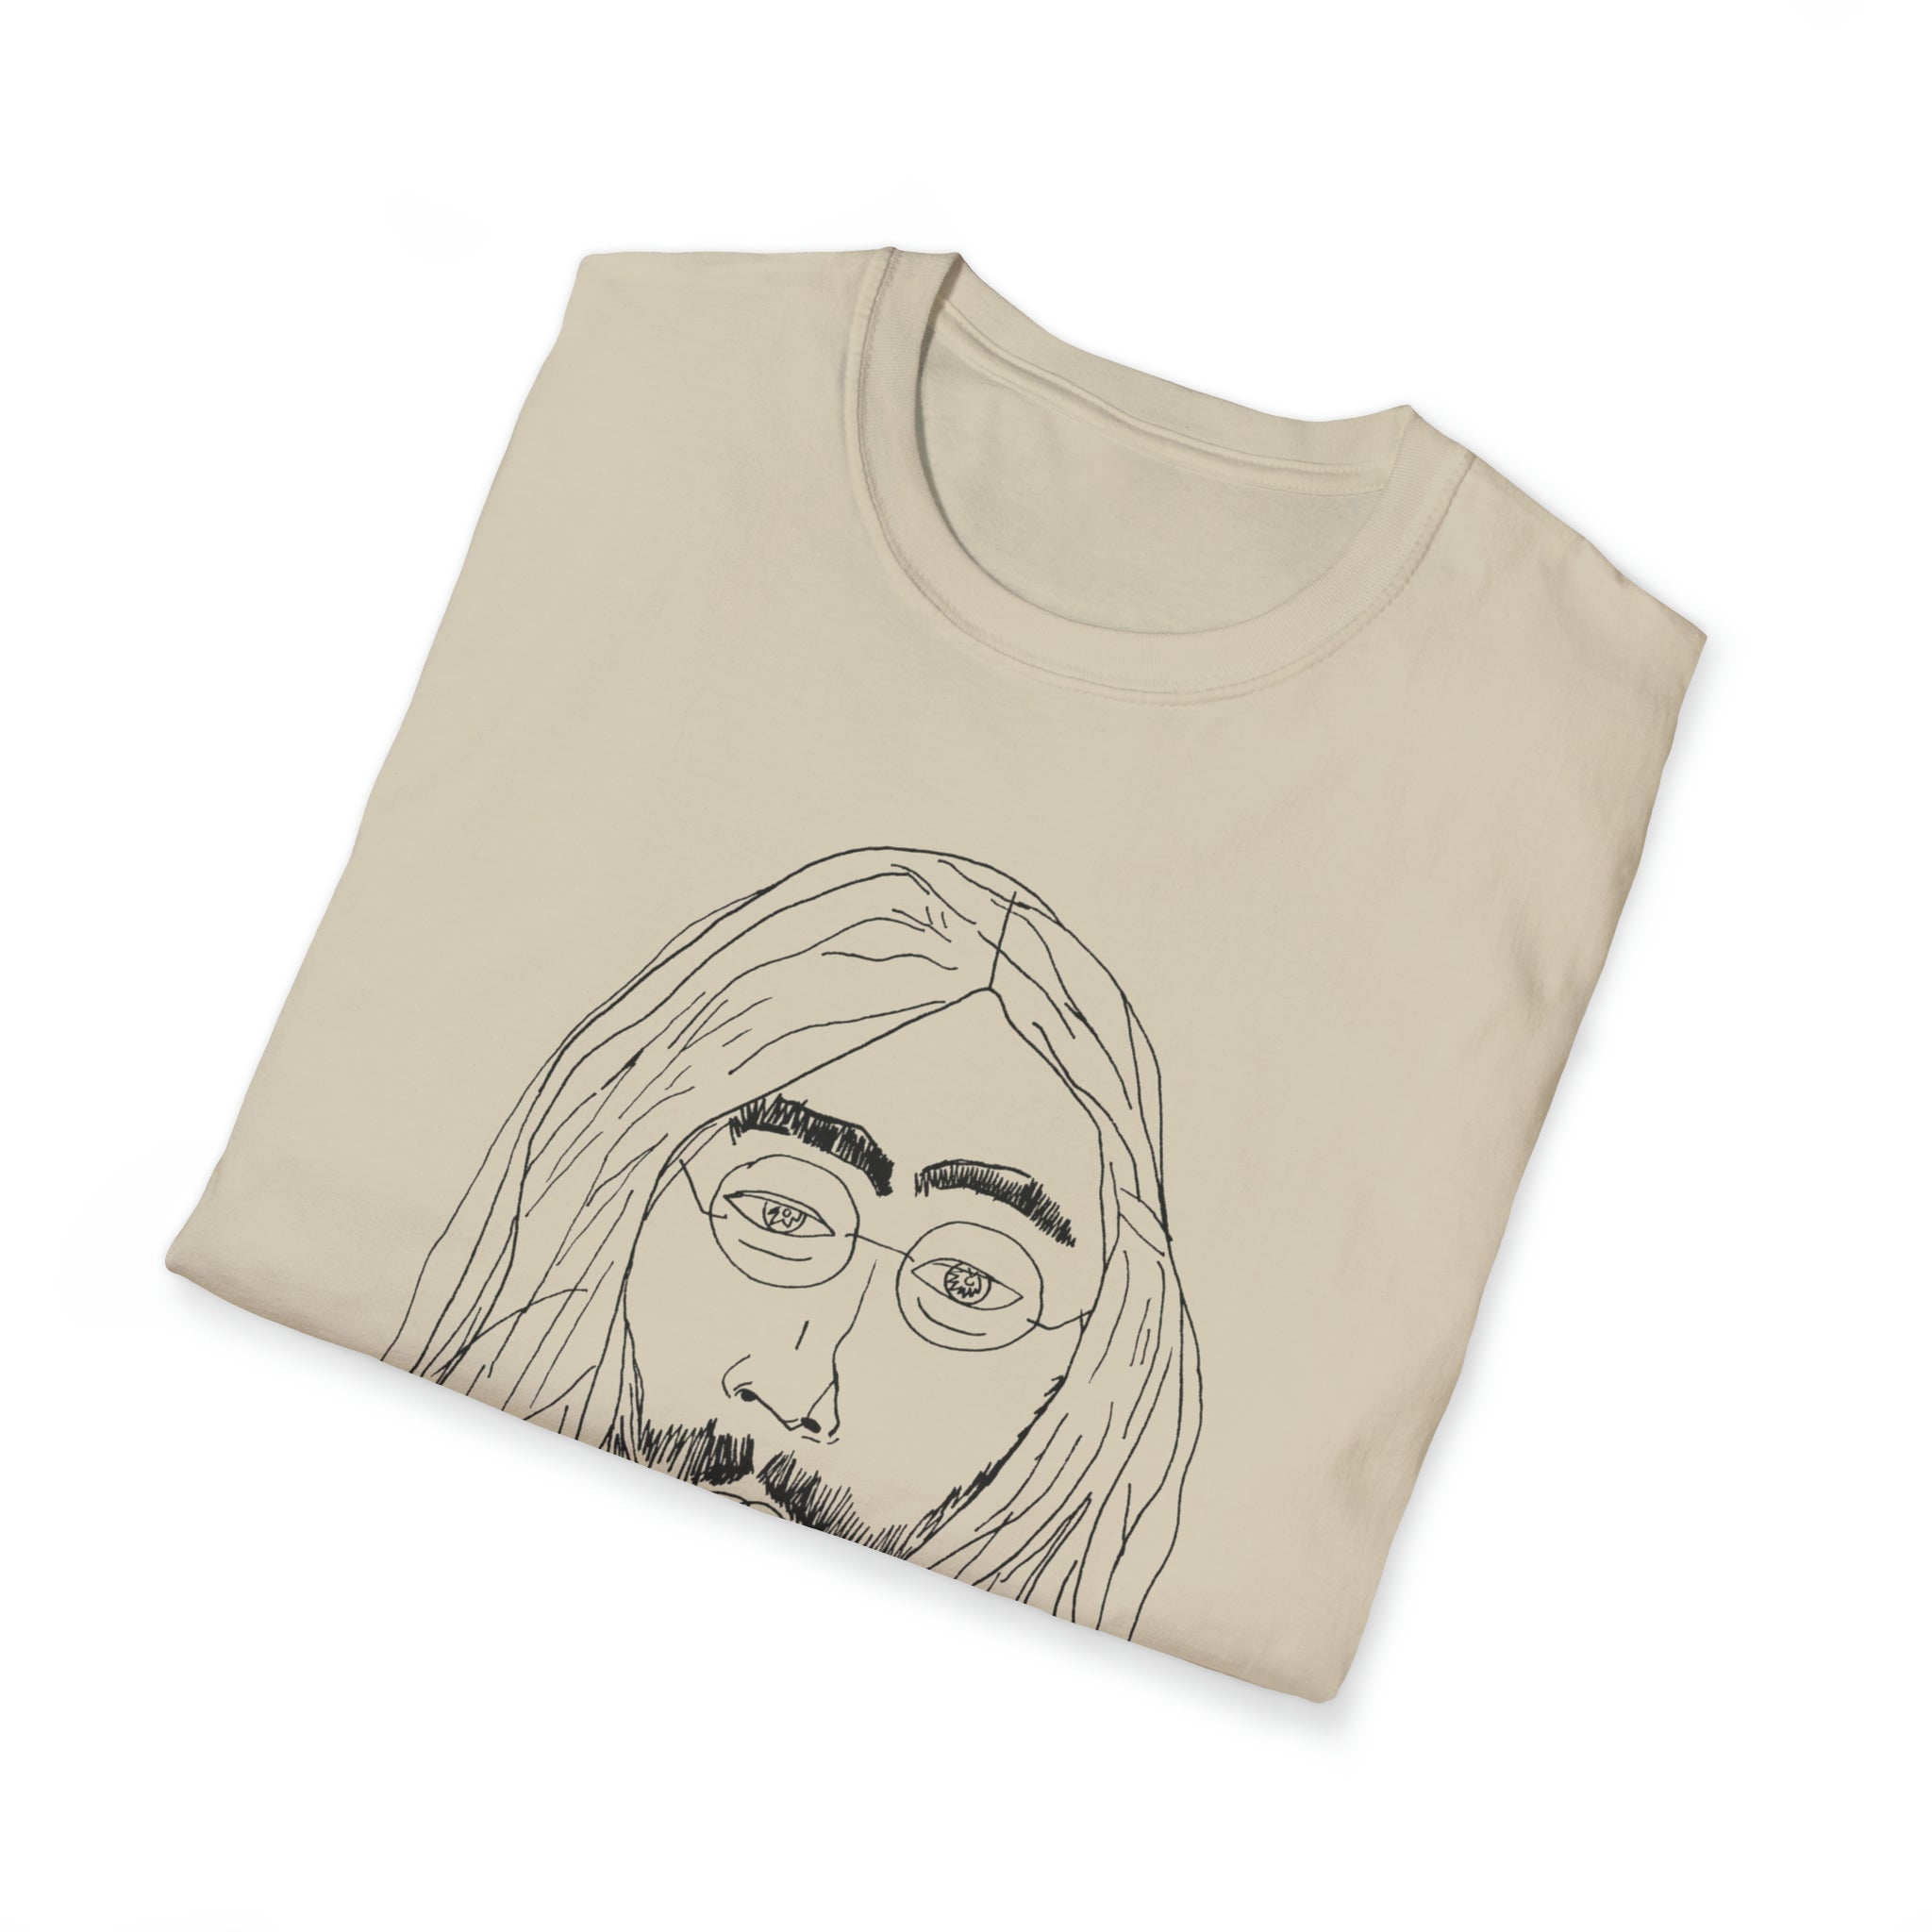 L is for Lennon Unisex Softstyle T-Shirt